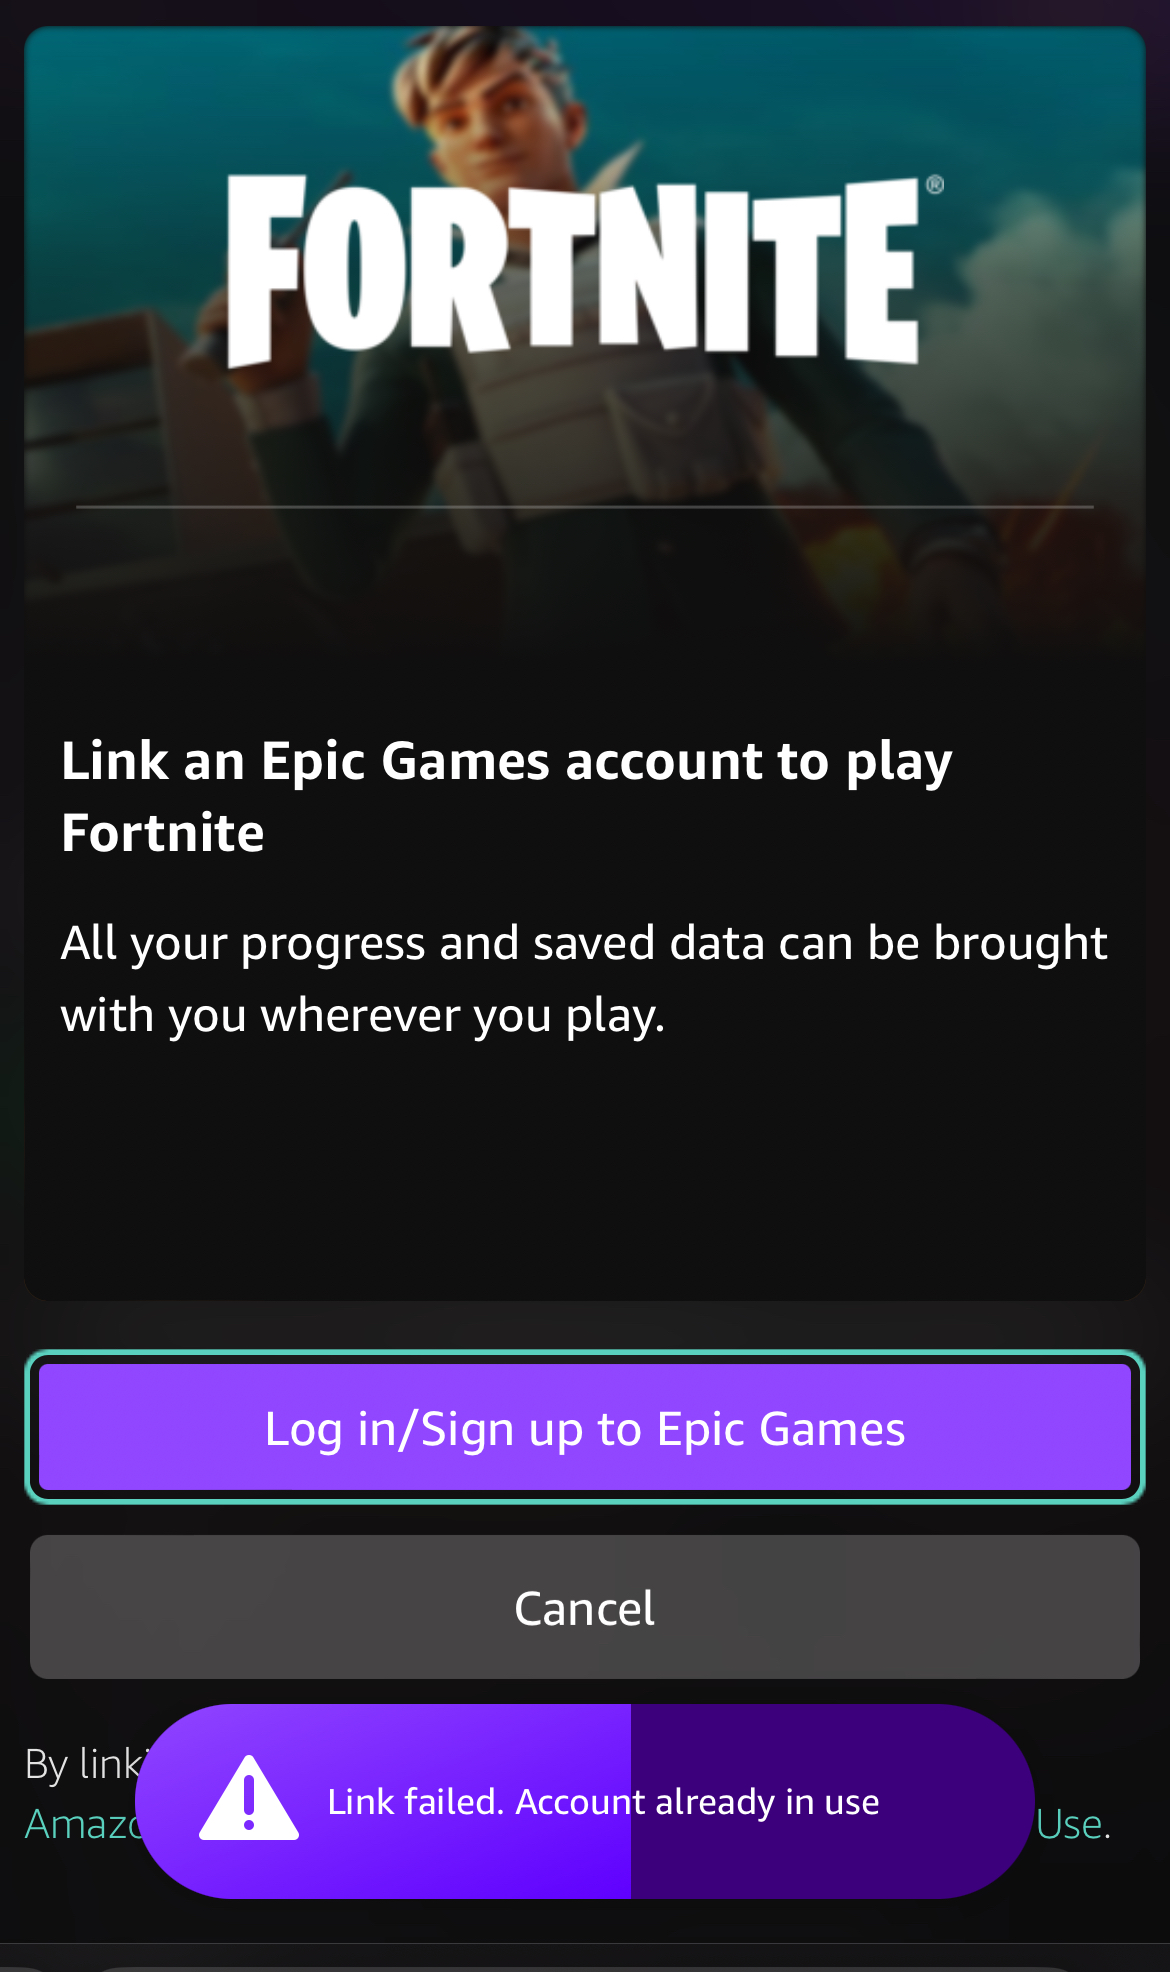 How to Login to Epic Games Account